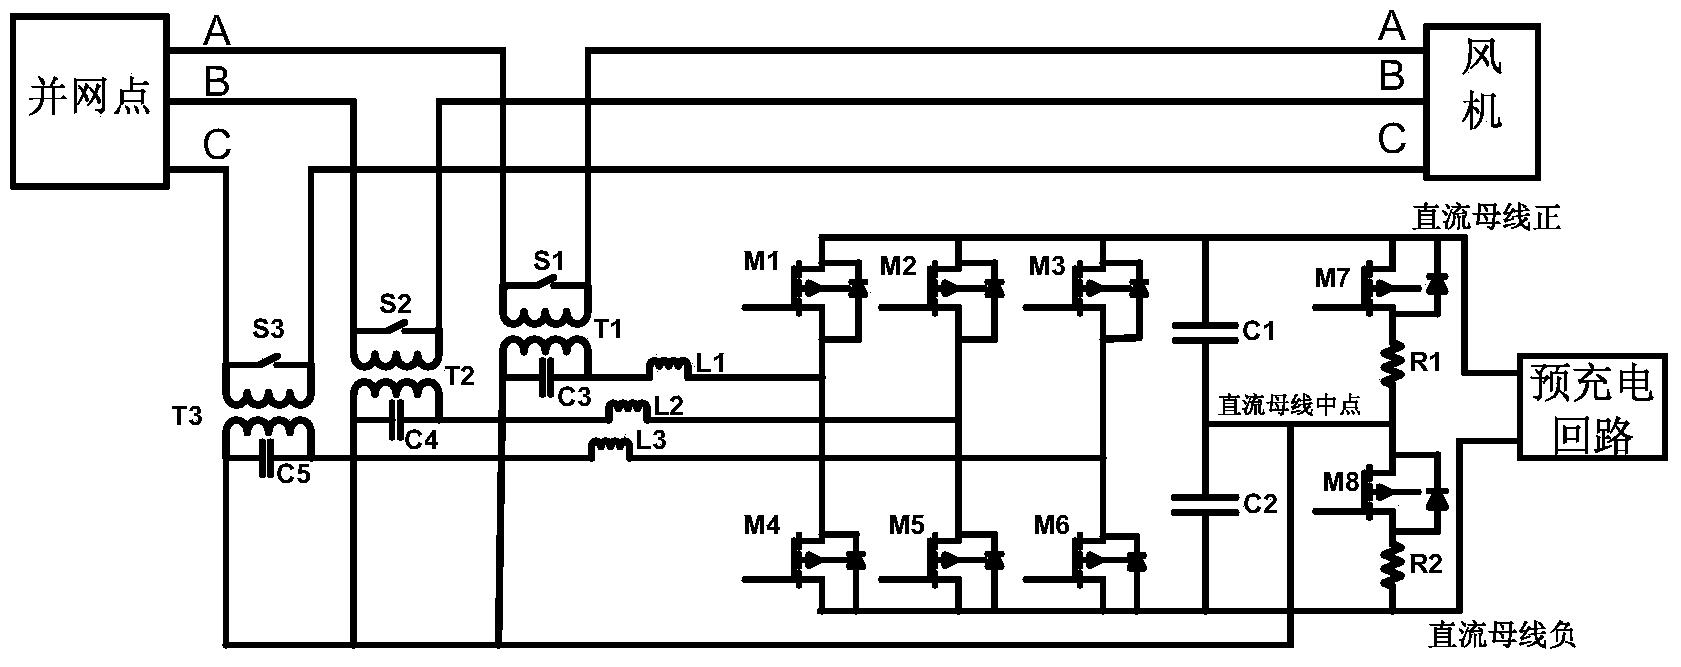 Single-phase controllable series compensation device applied to low voltage ride through of fans